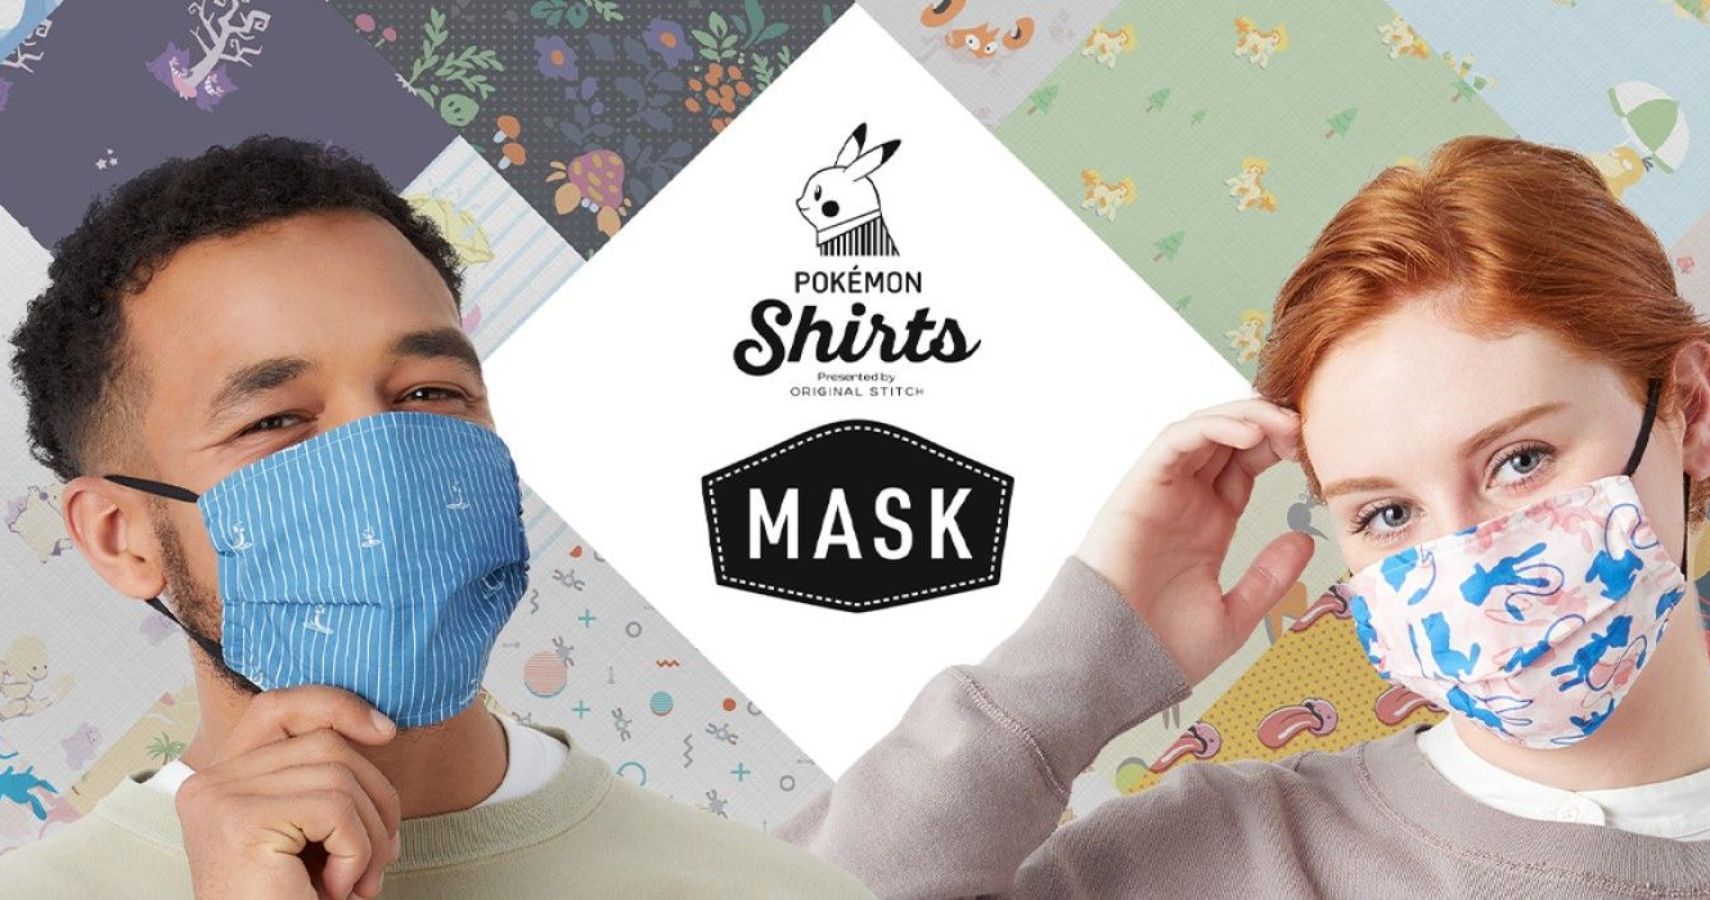 Pokemon Masks Are Now Available Accompanying The Shirts From Original Stitch